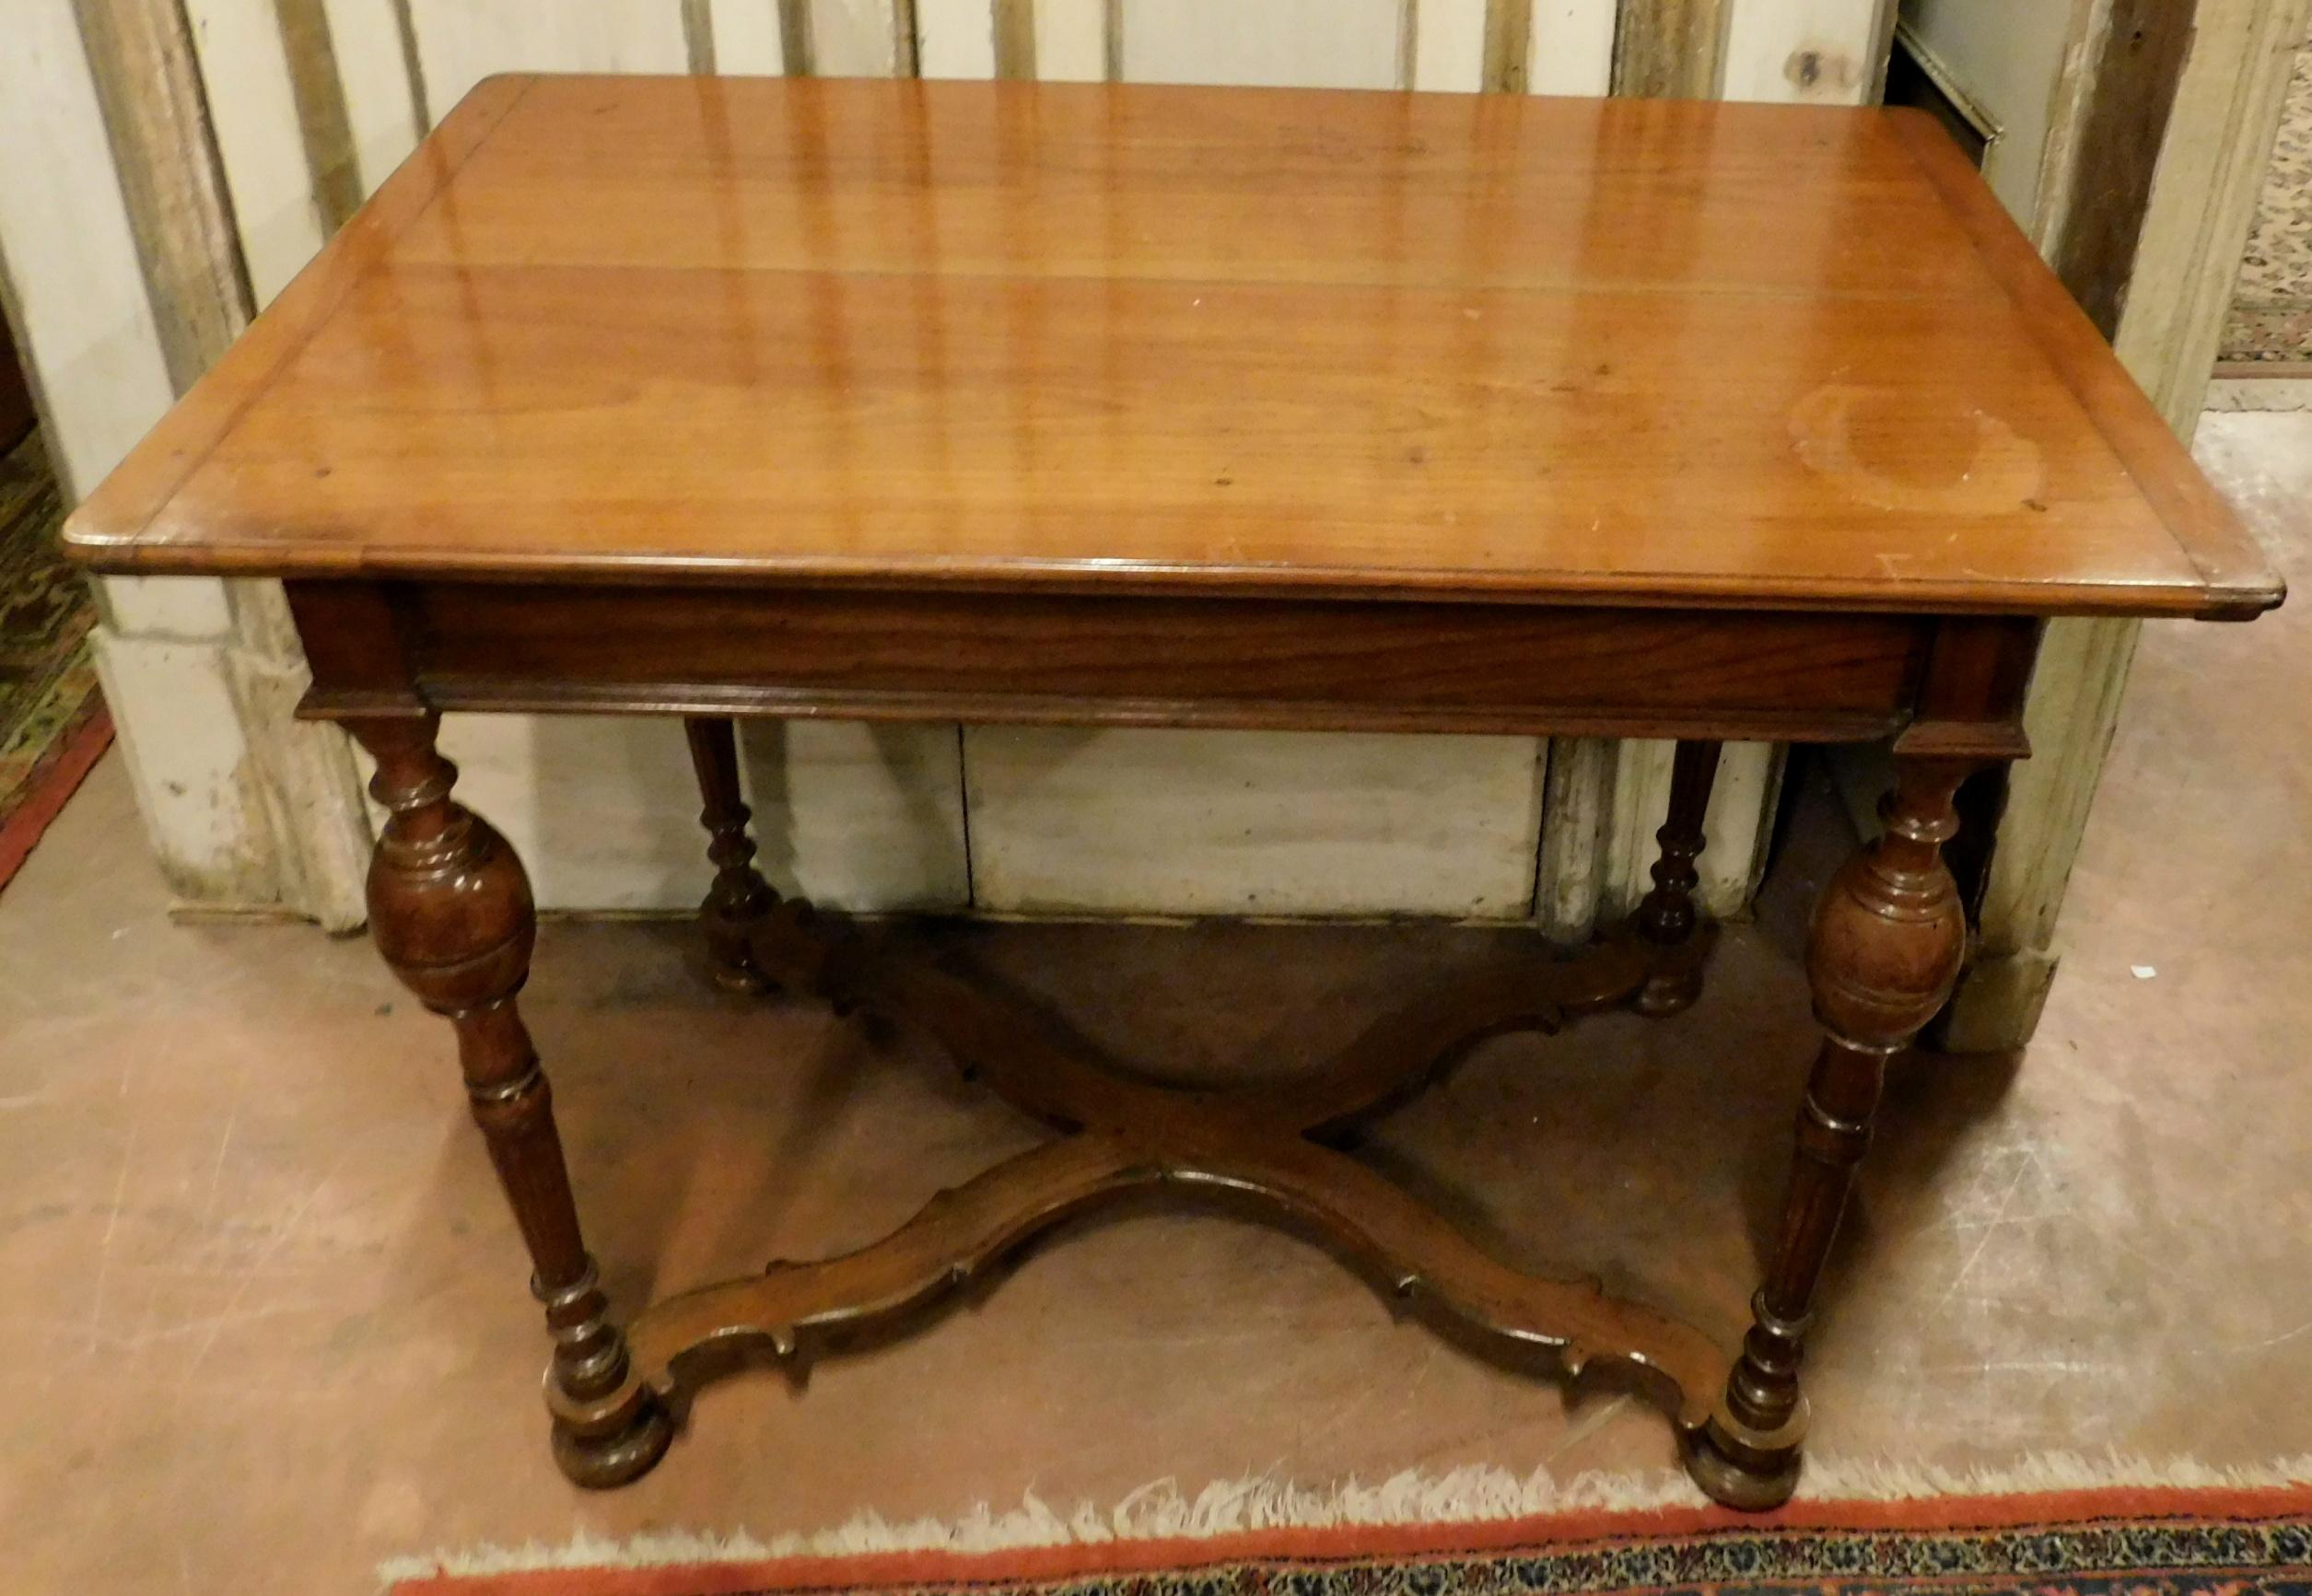 Antique Cherry Wood Table with Hand Carved Legs, 18th Century, Italy For Sale 2